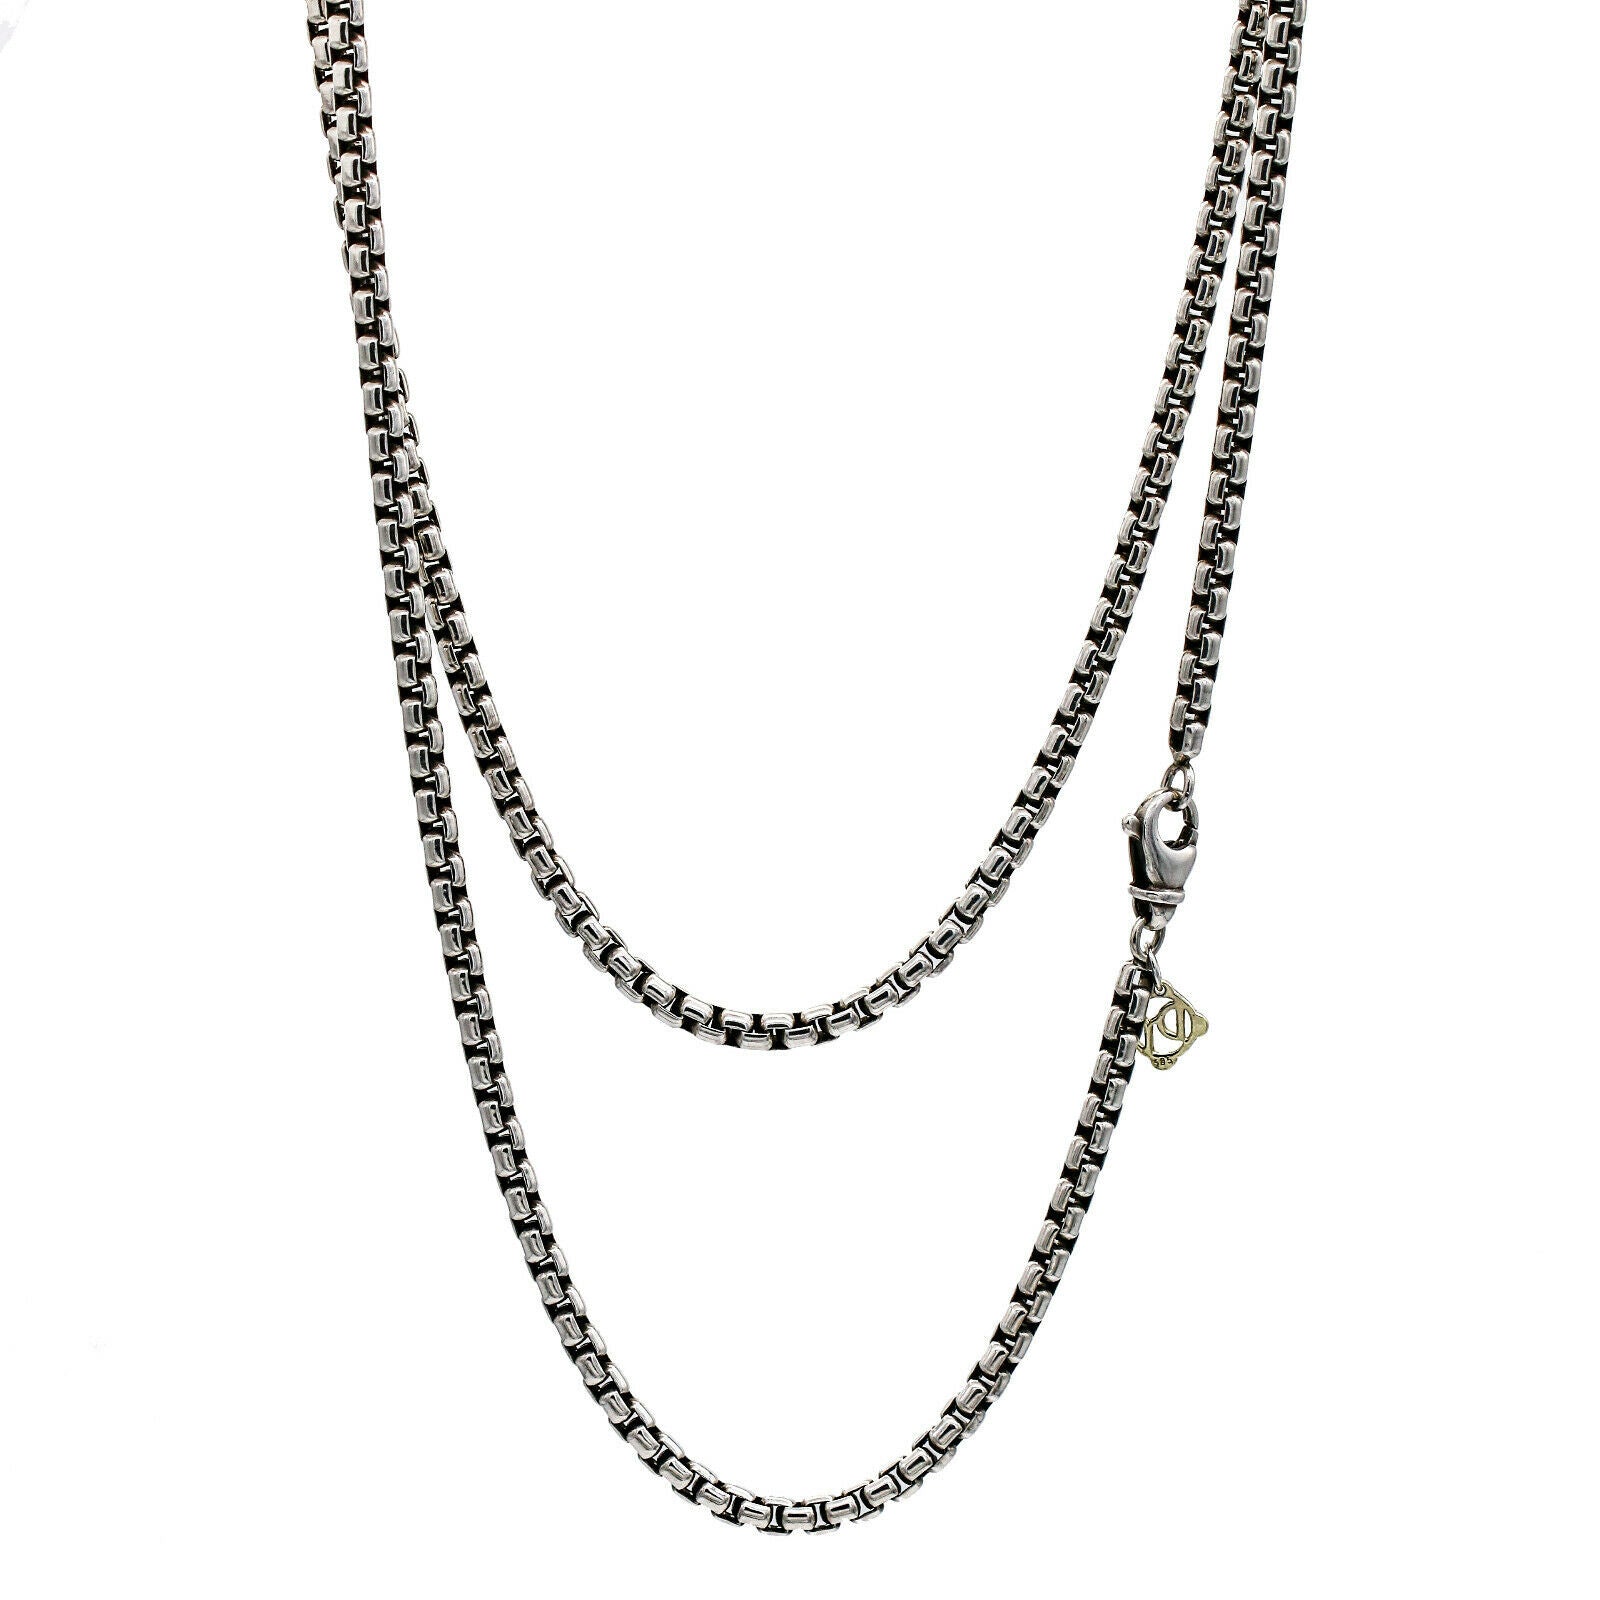 David Yurman Medium Box Chain Necklace with an Accent of 14K Gold, 3.6mm